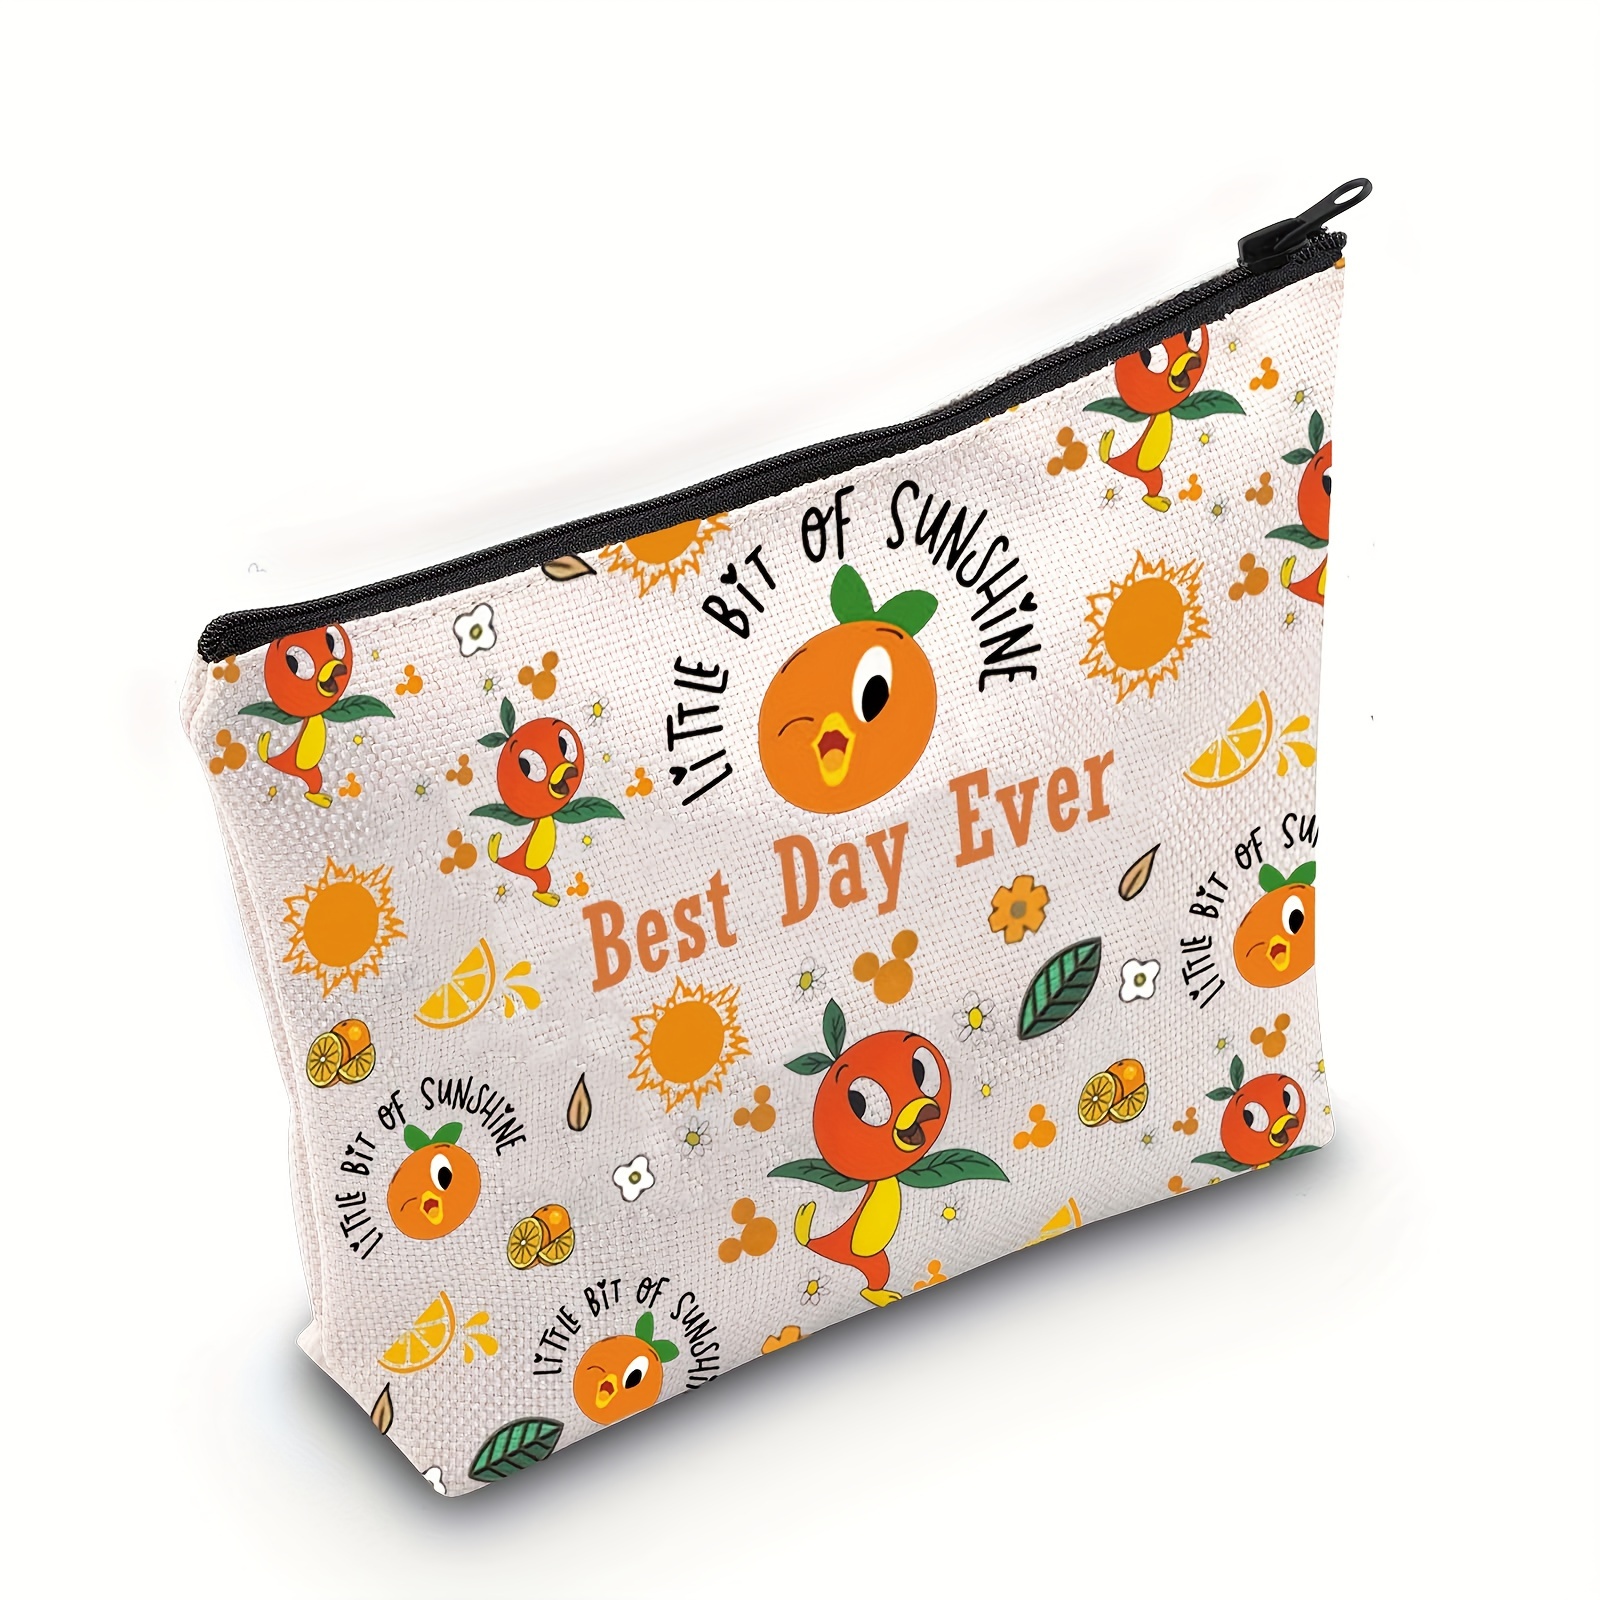 

Linen Cosmetic Makeup Bag With Design For Teens & Adults, Sunshine Theme, Best Day Ever Inspiring Message, Durable Zippered Toiletry Pouch For Party Supplies